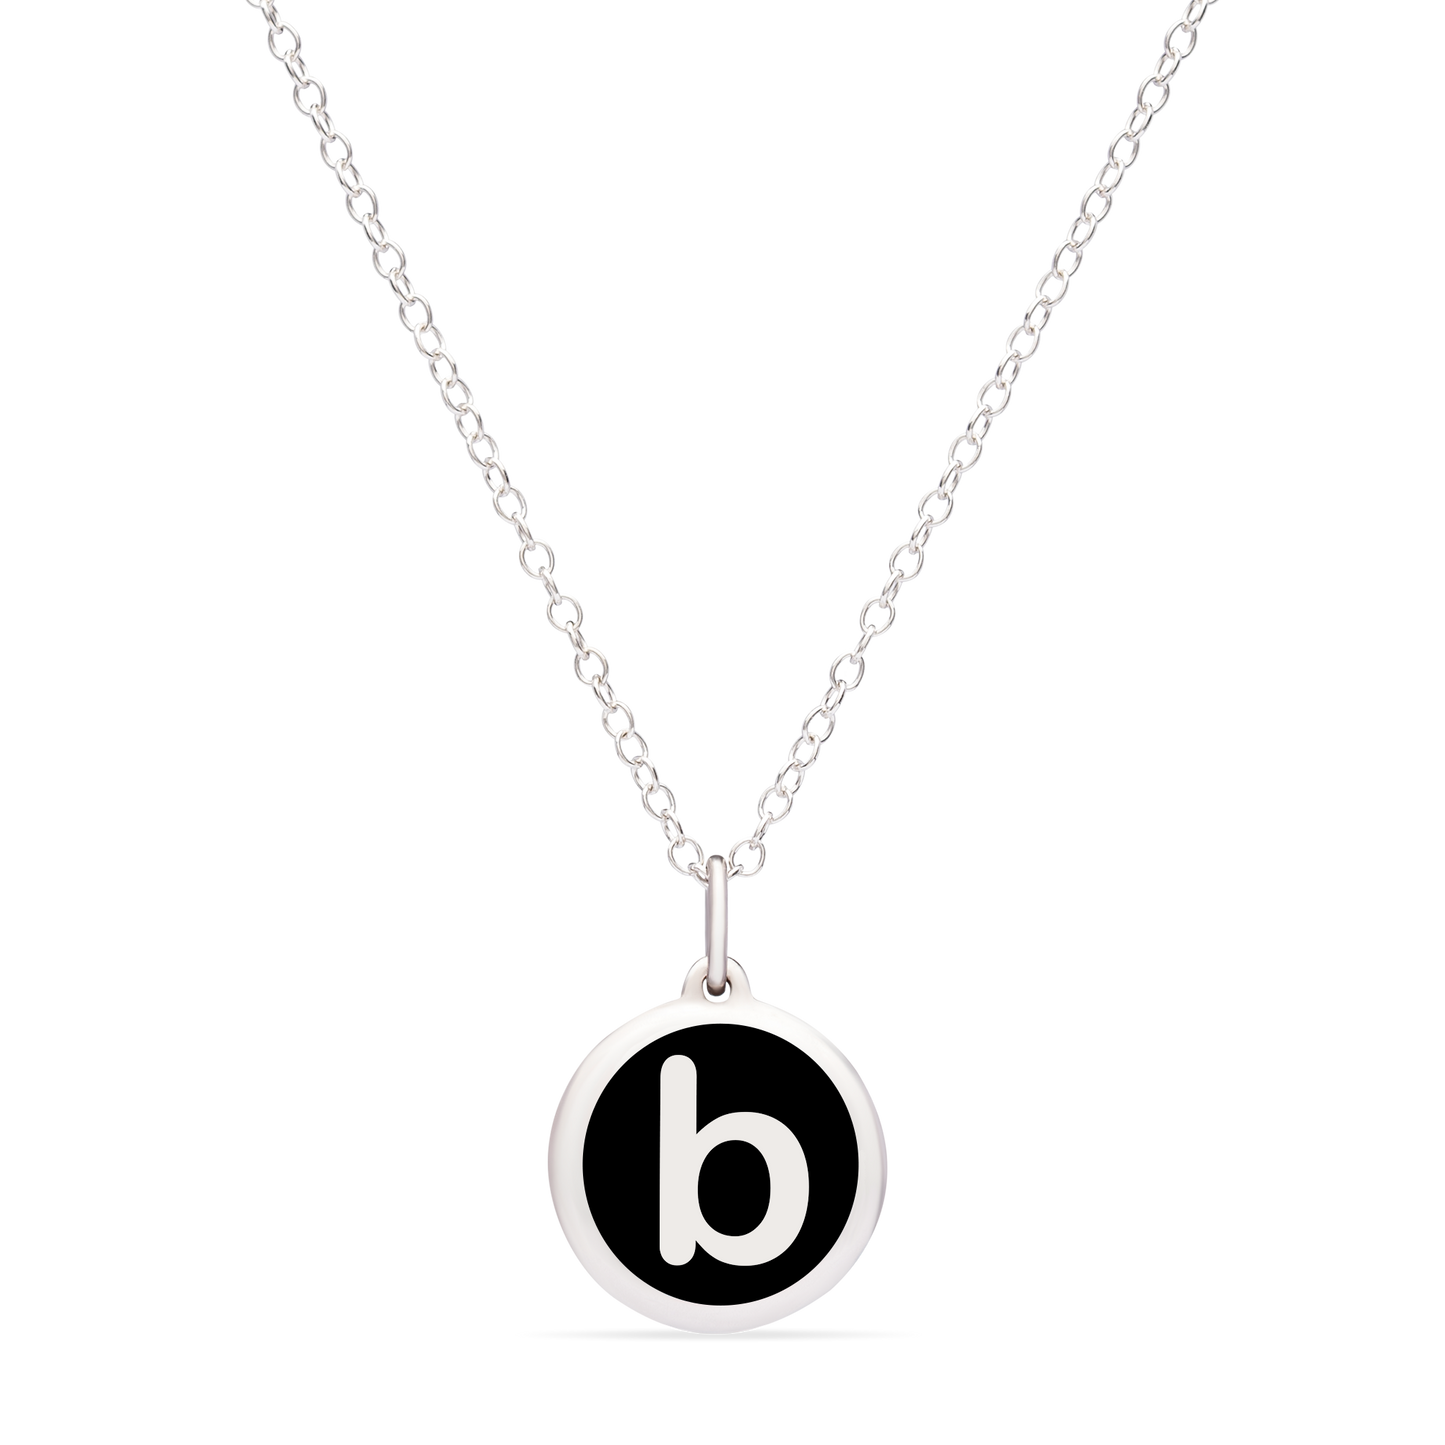 MINI INITIAL 'b' CHARM sterling silver with rhodium plate